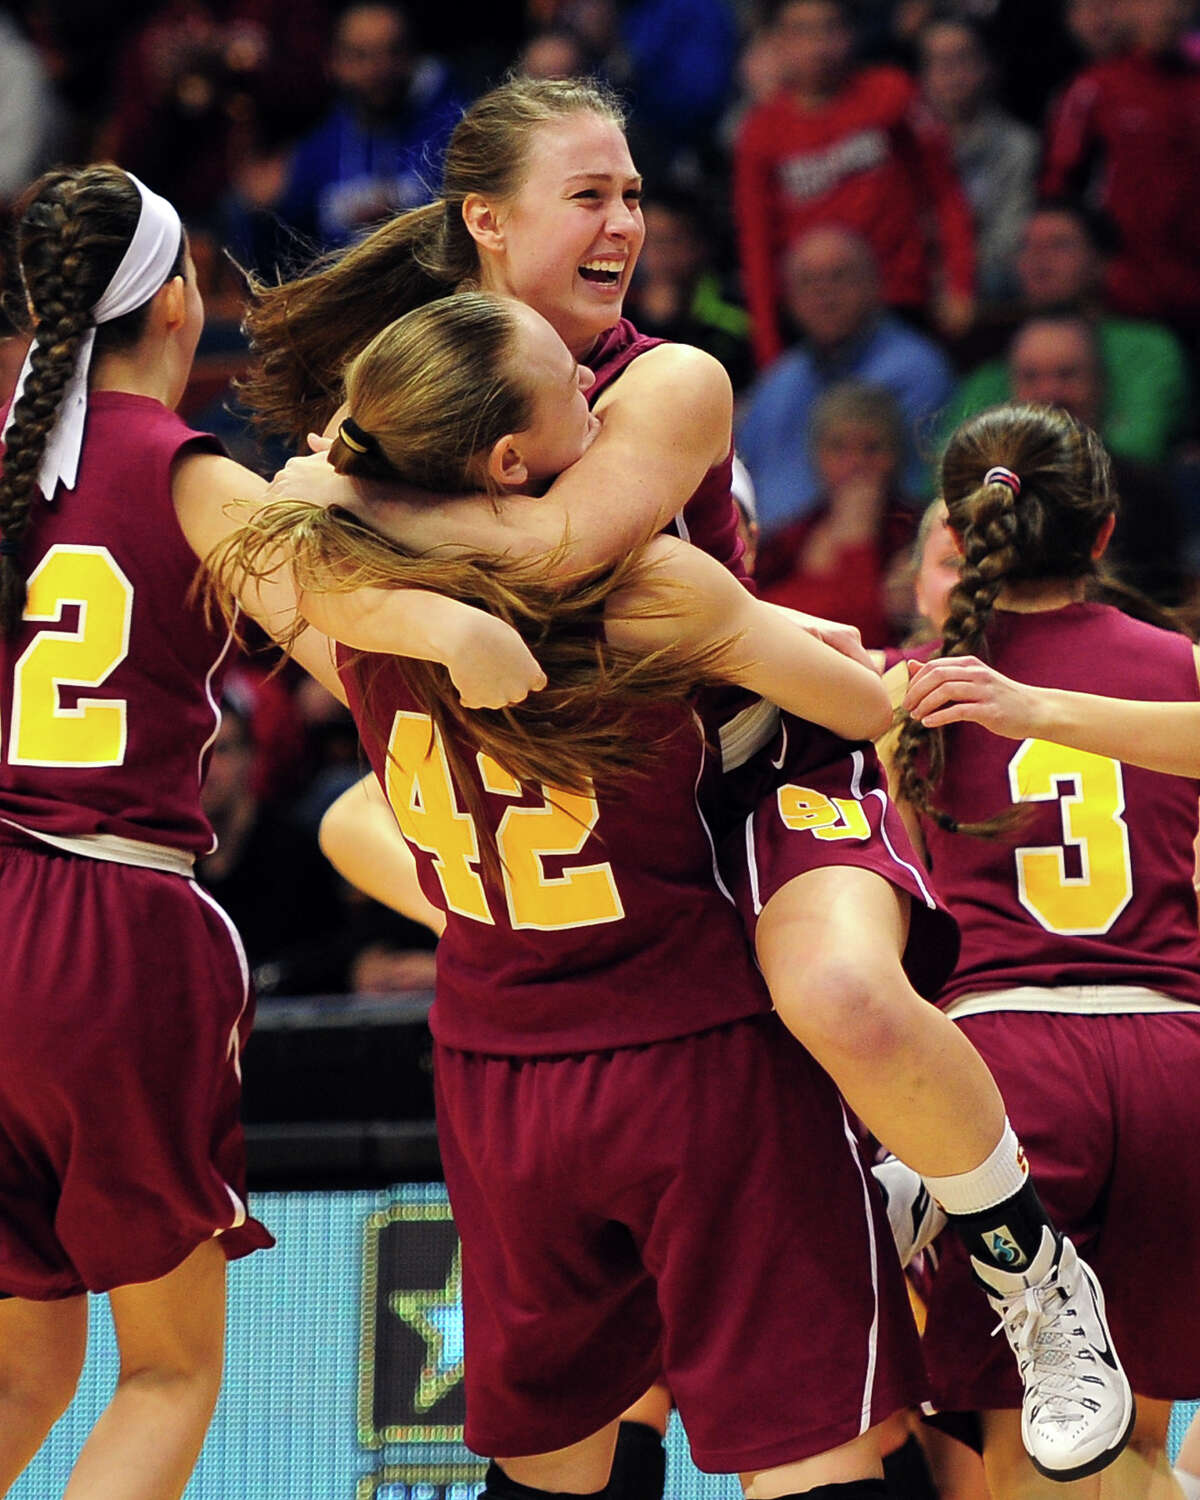 St. Joseph's Jacqueline Jozefick (42) and Erika Horvath hug as they celebrate beating Cromwell, during CIAC State Girls Basketball Tournament action at Mohegan Sun in Uncasville, Conn., on Saturday Mar. 21, 2015.